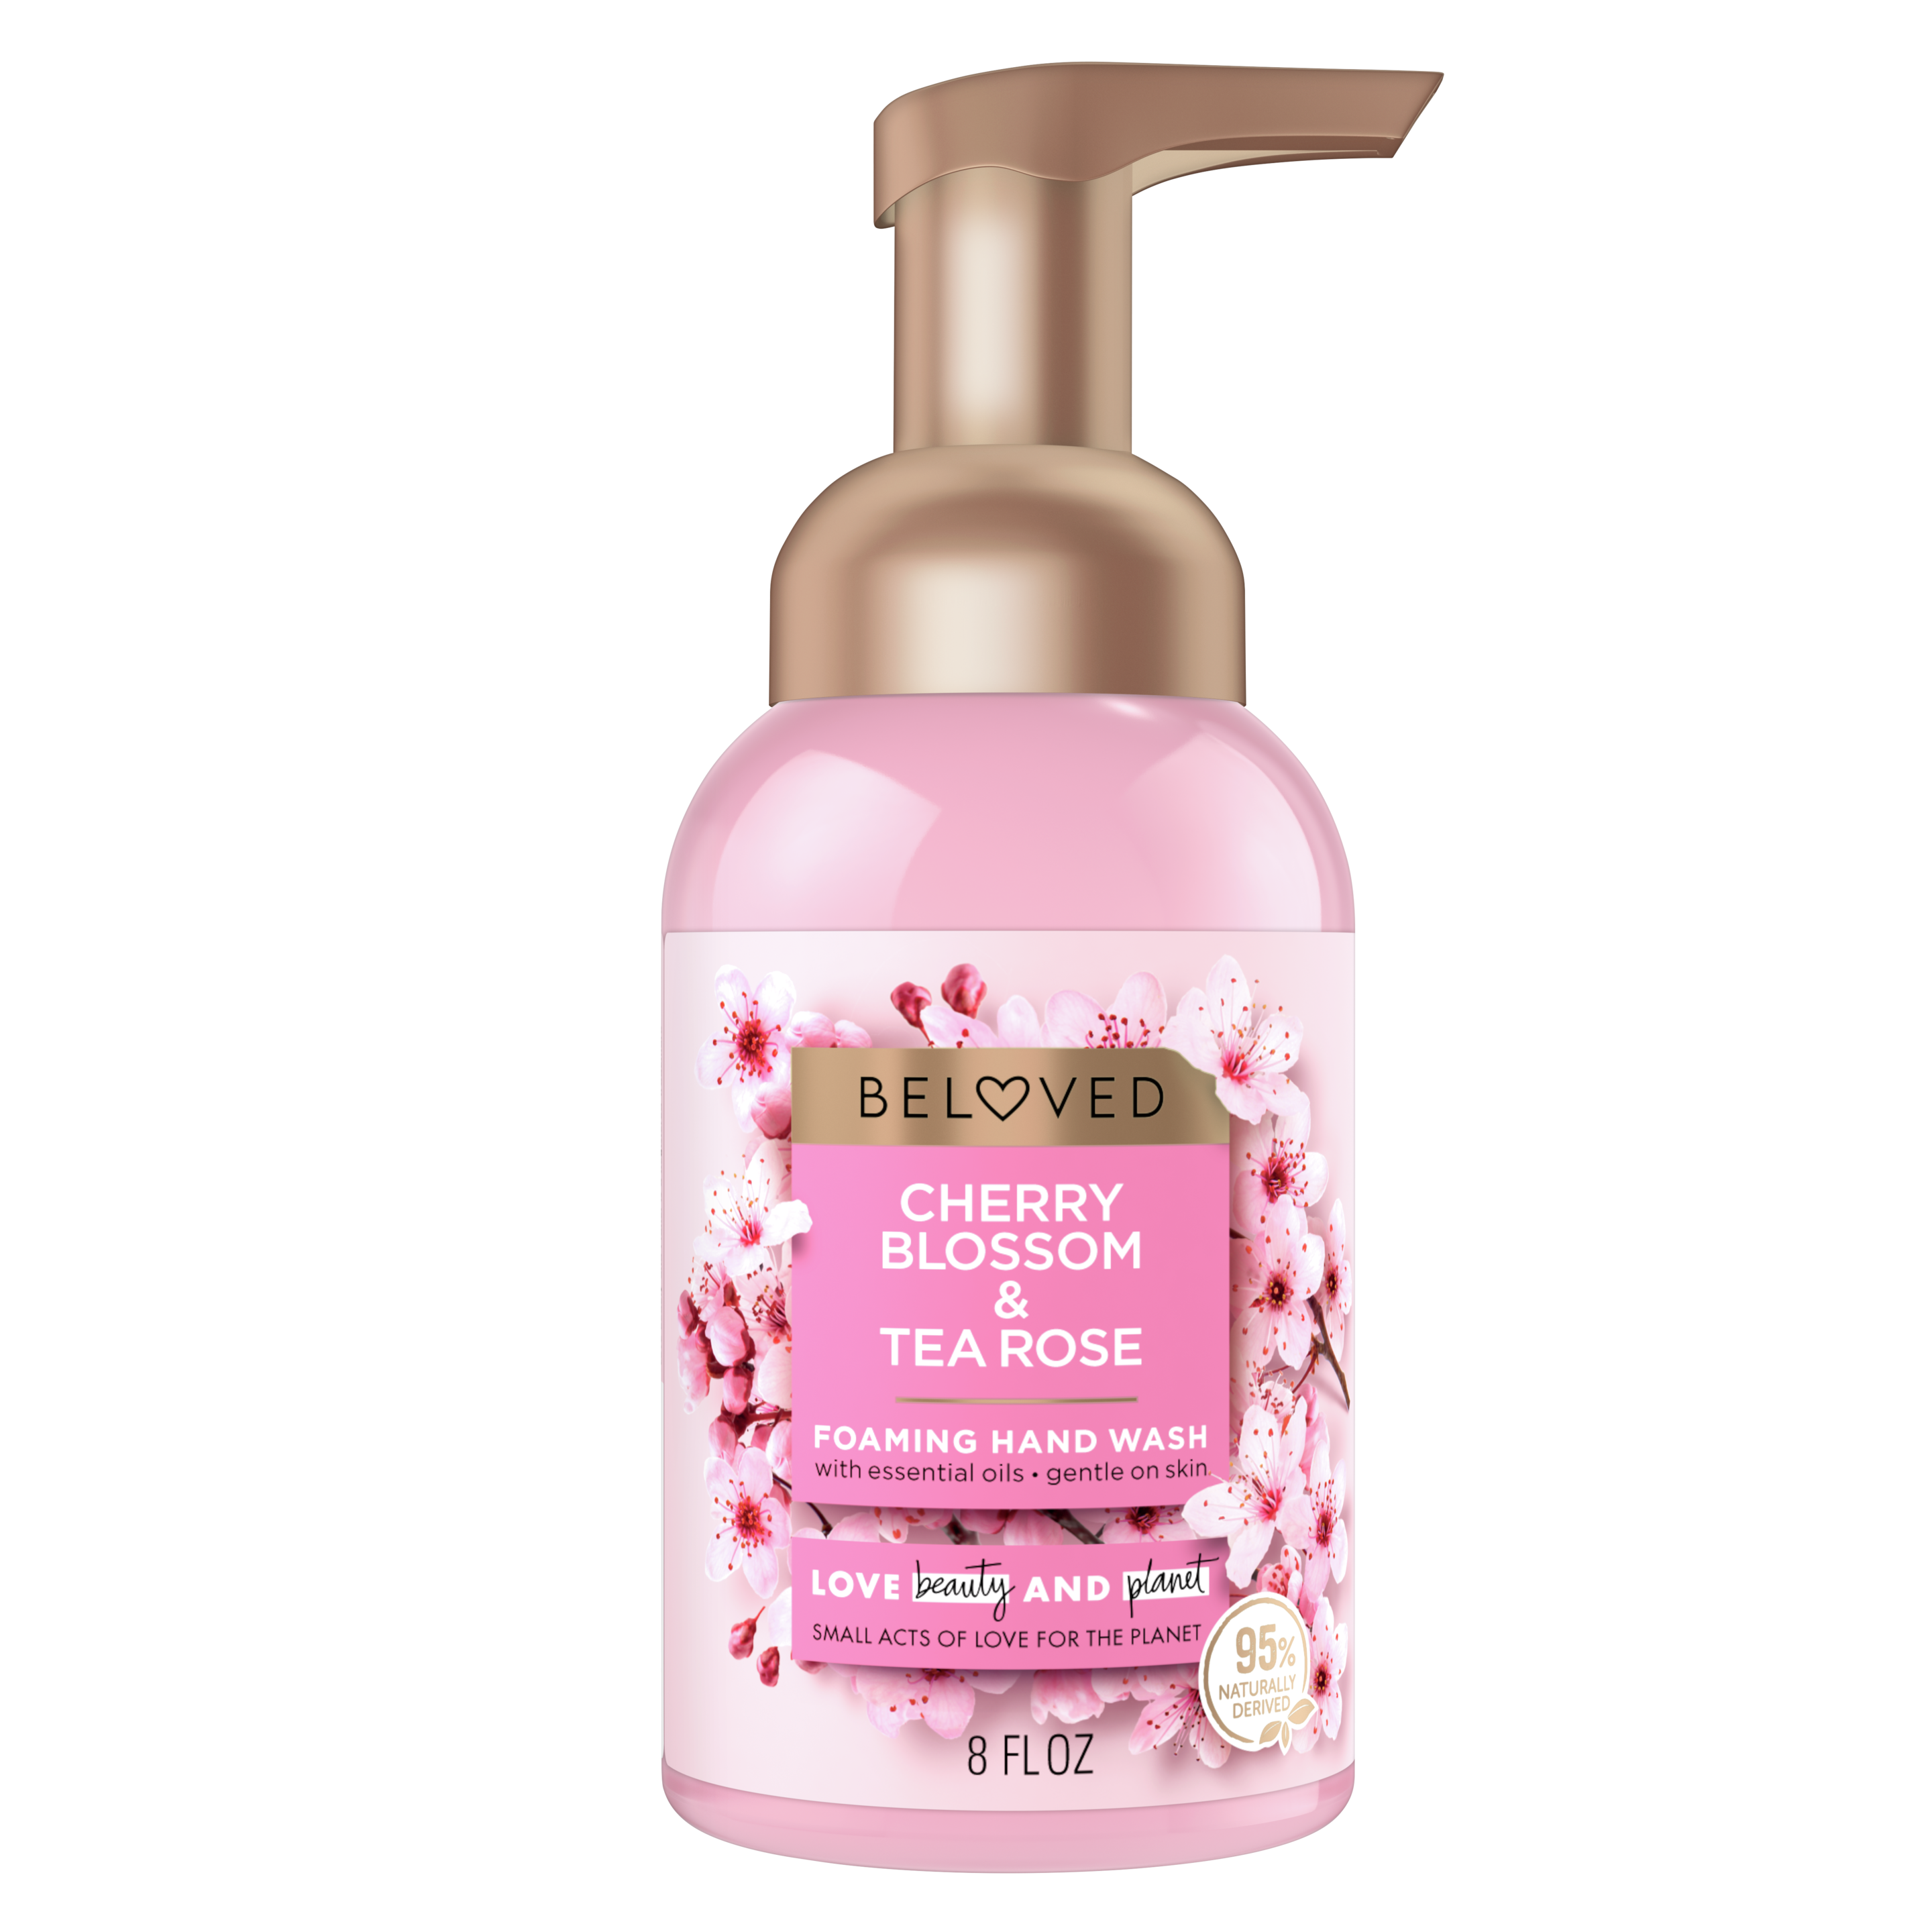 Front of foaming hand wash pack Love Beauty Planet Cherry Blossom & Tea Rose Foaming Hand Wash